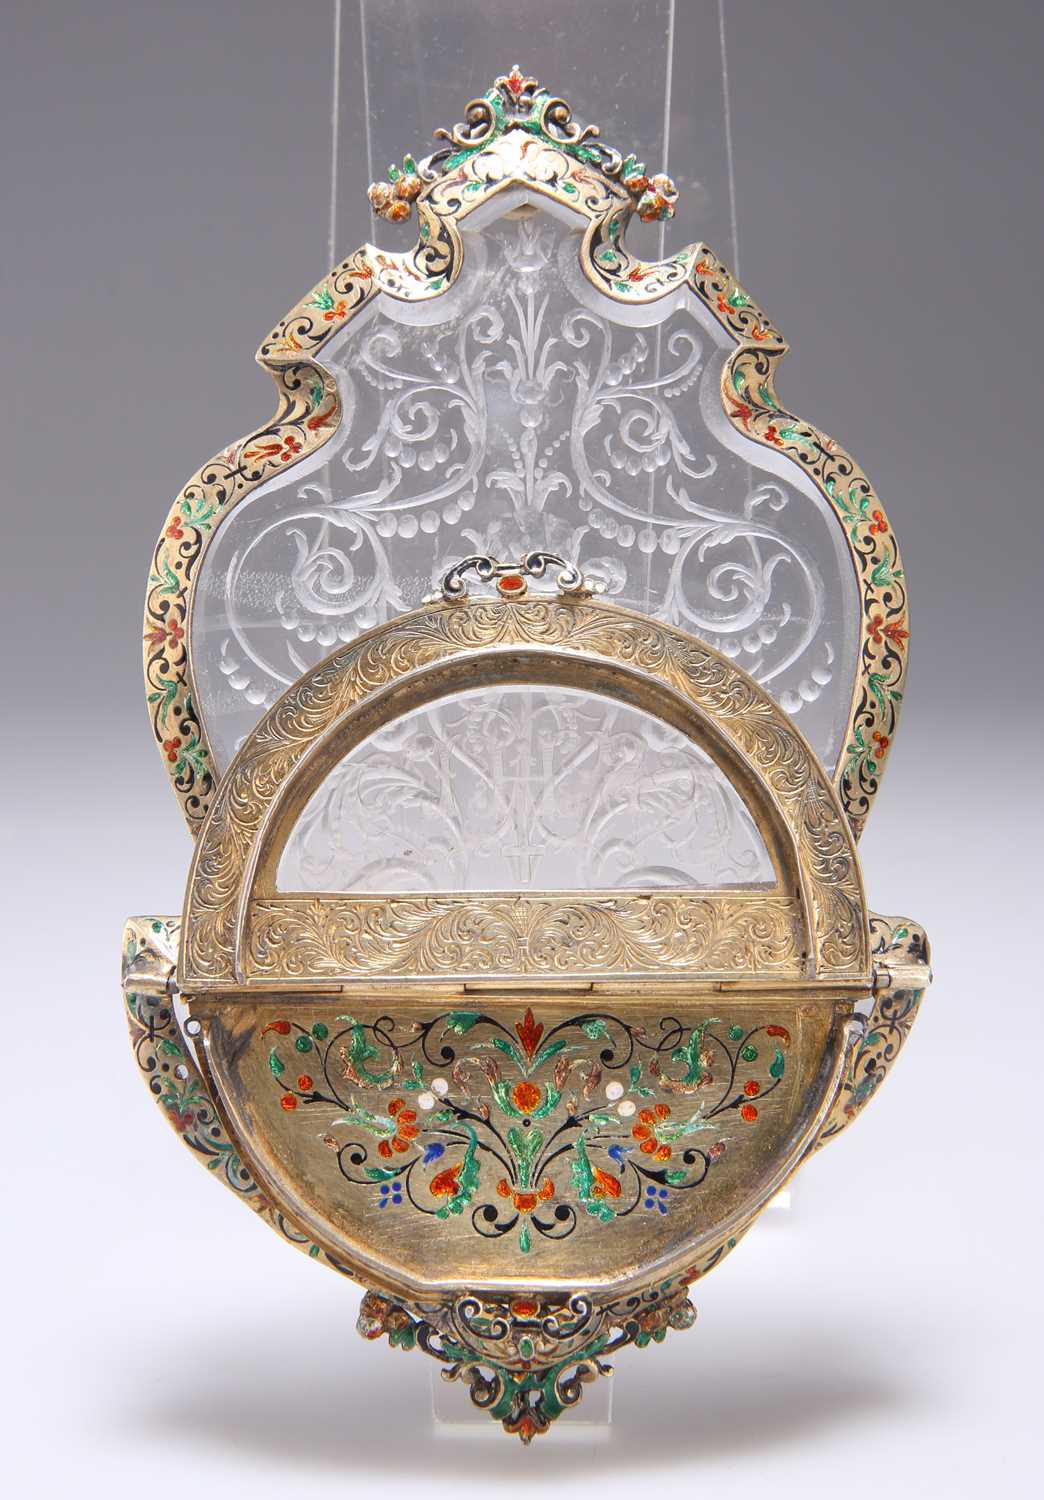 A VIENNESE ENAMEL AND ROCK CRYSTAL TRAVELLING ALTAR, BY HERMANN RATZERSDORFER, VIENNA, CIRCA 1890 - Image 2 of 4